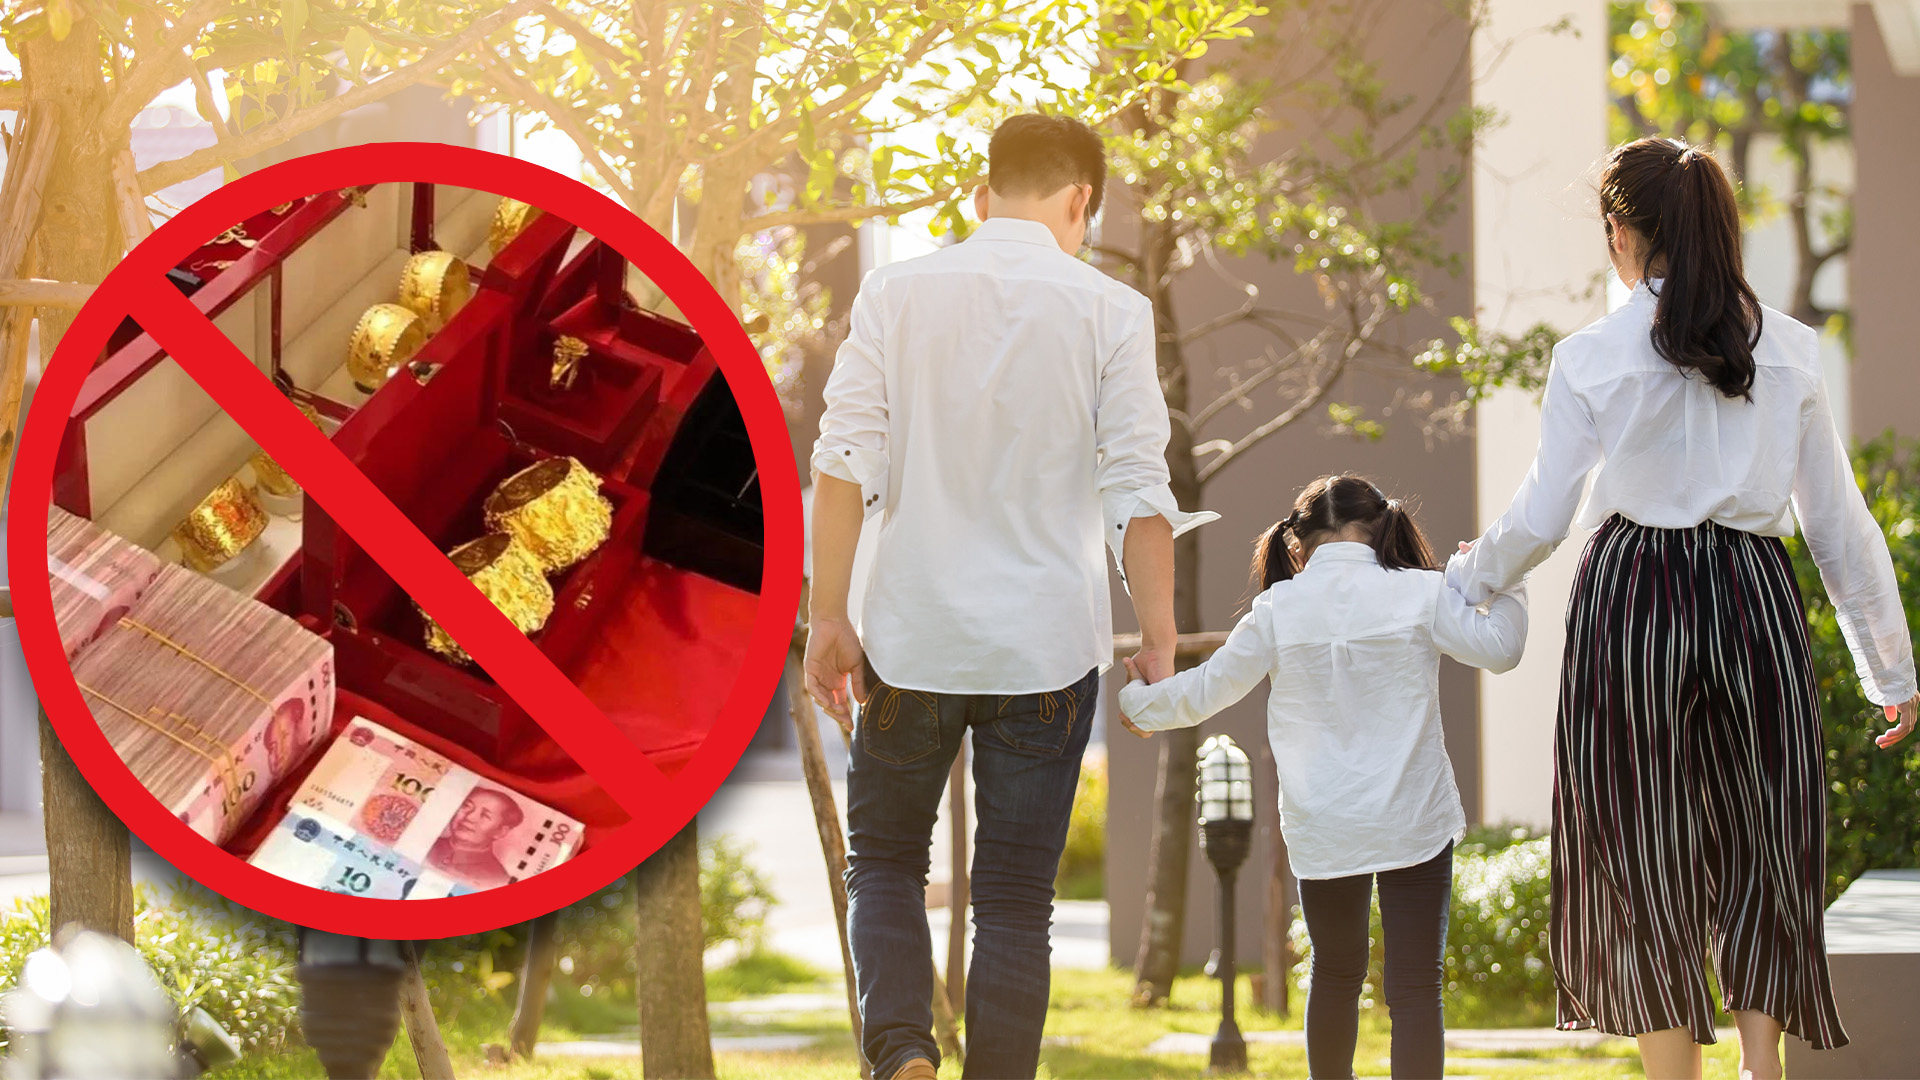 A county-level government in China has launched an incentive scheme for newlywed families in a bid to help eradicate the costly traditional practice of paying a “bride price” as a betrothal gift. Photo: SCMP composite/Shutterstock/Sohu